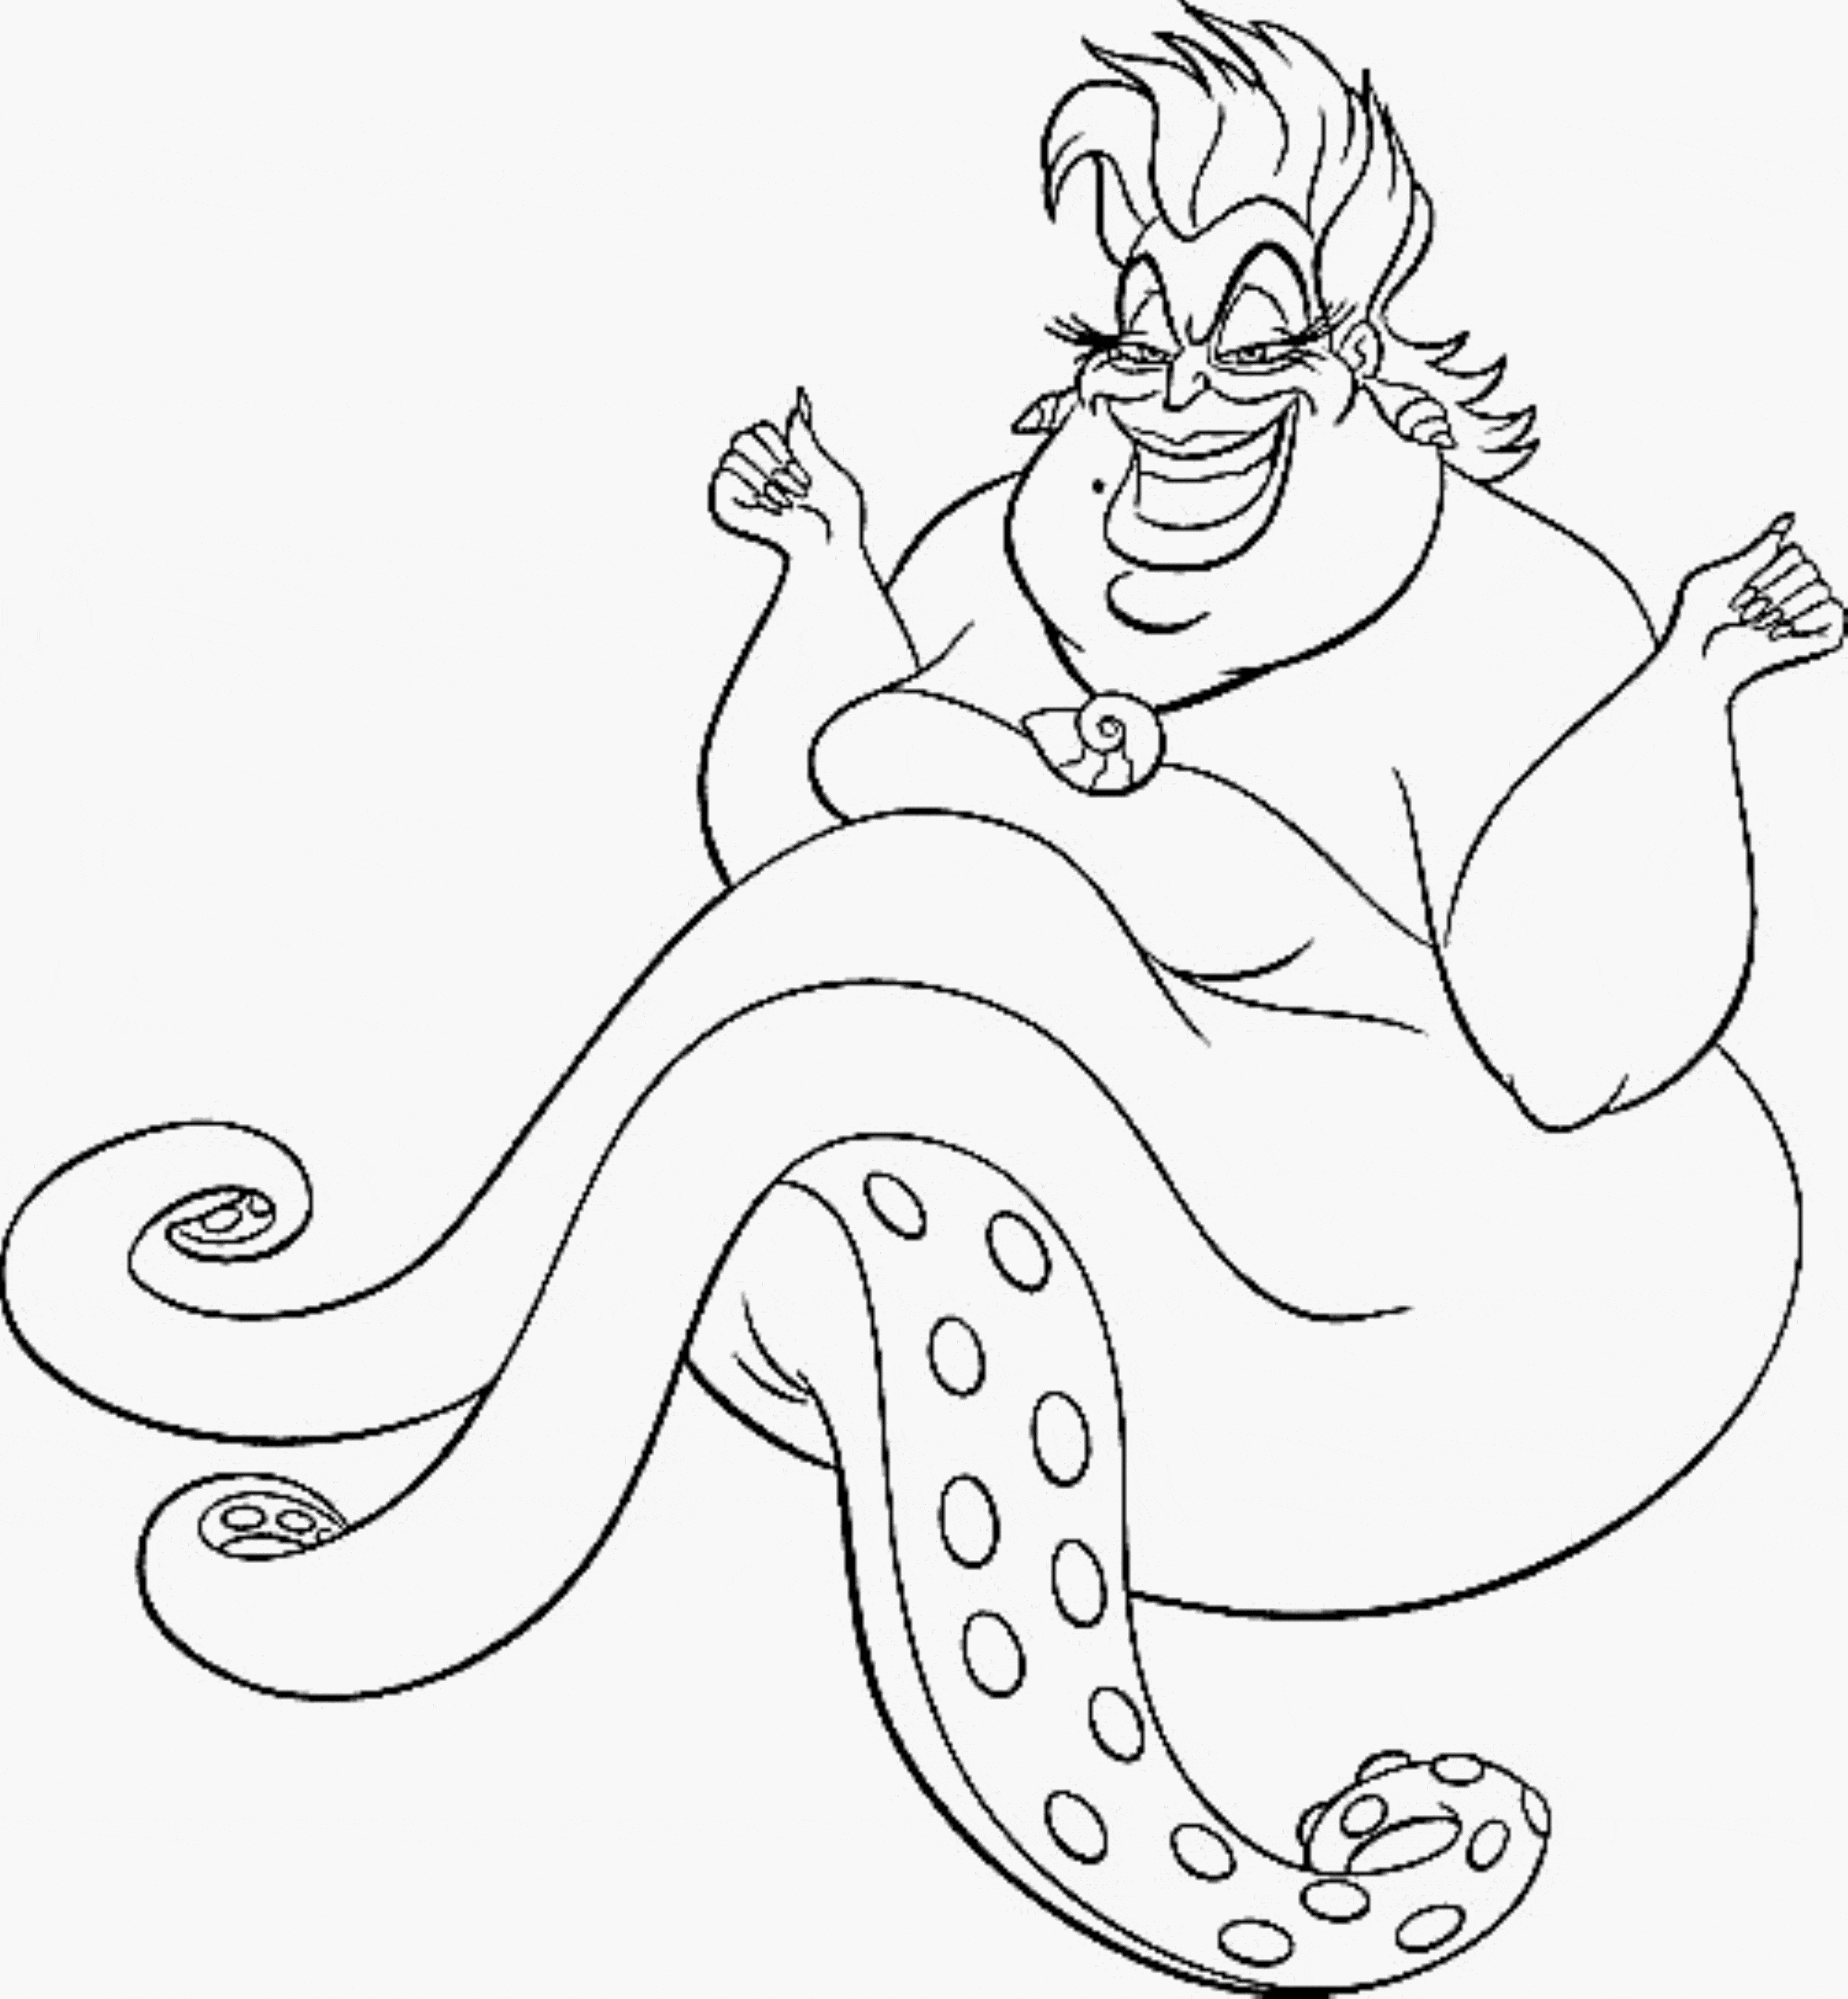 ariel the little mermaid coloring pages ariel the little mermaid coloring pages for girls to print pages coloring ariel little the mermaid 